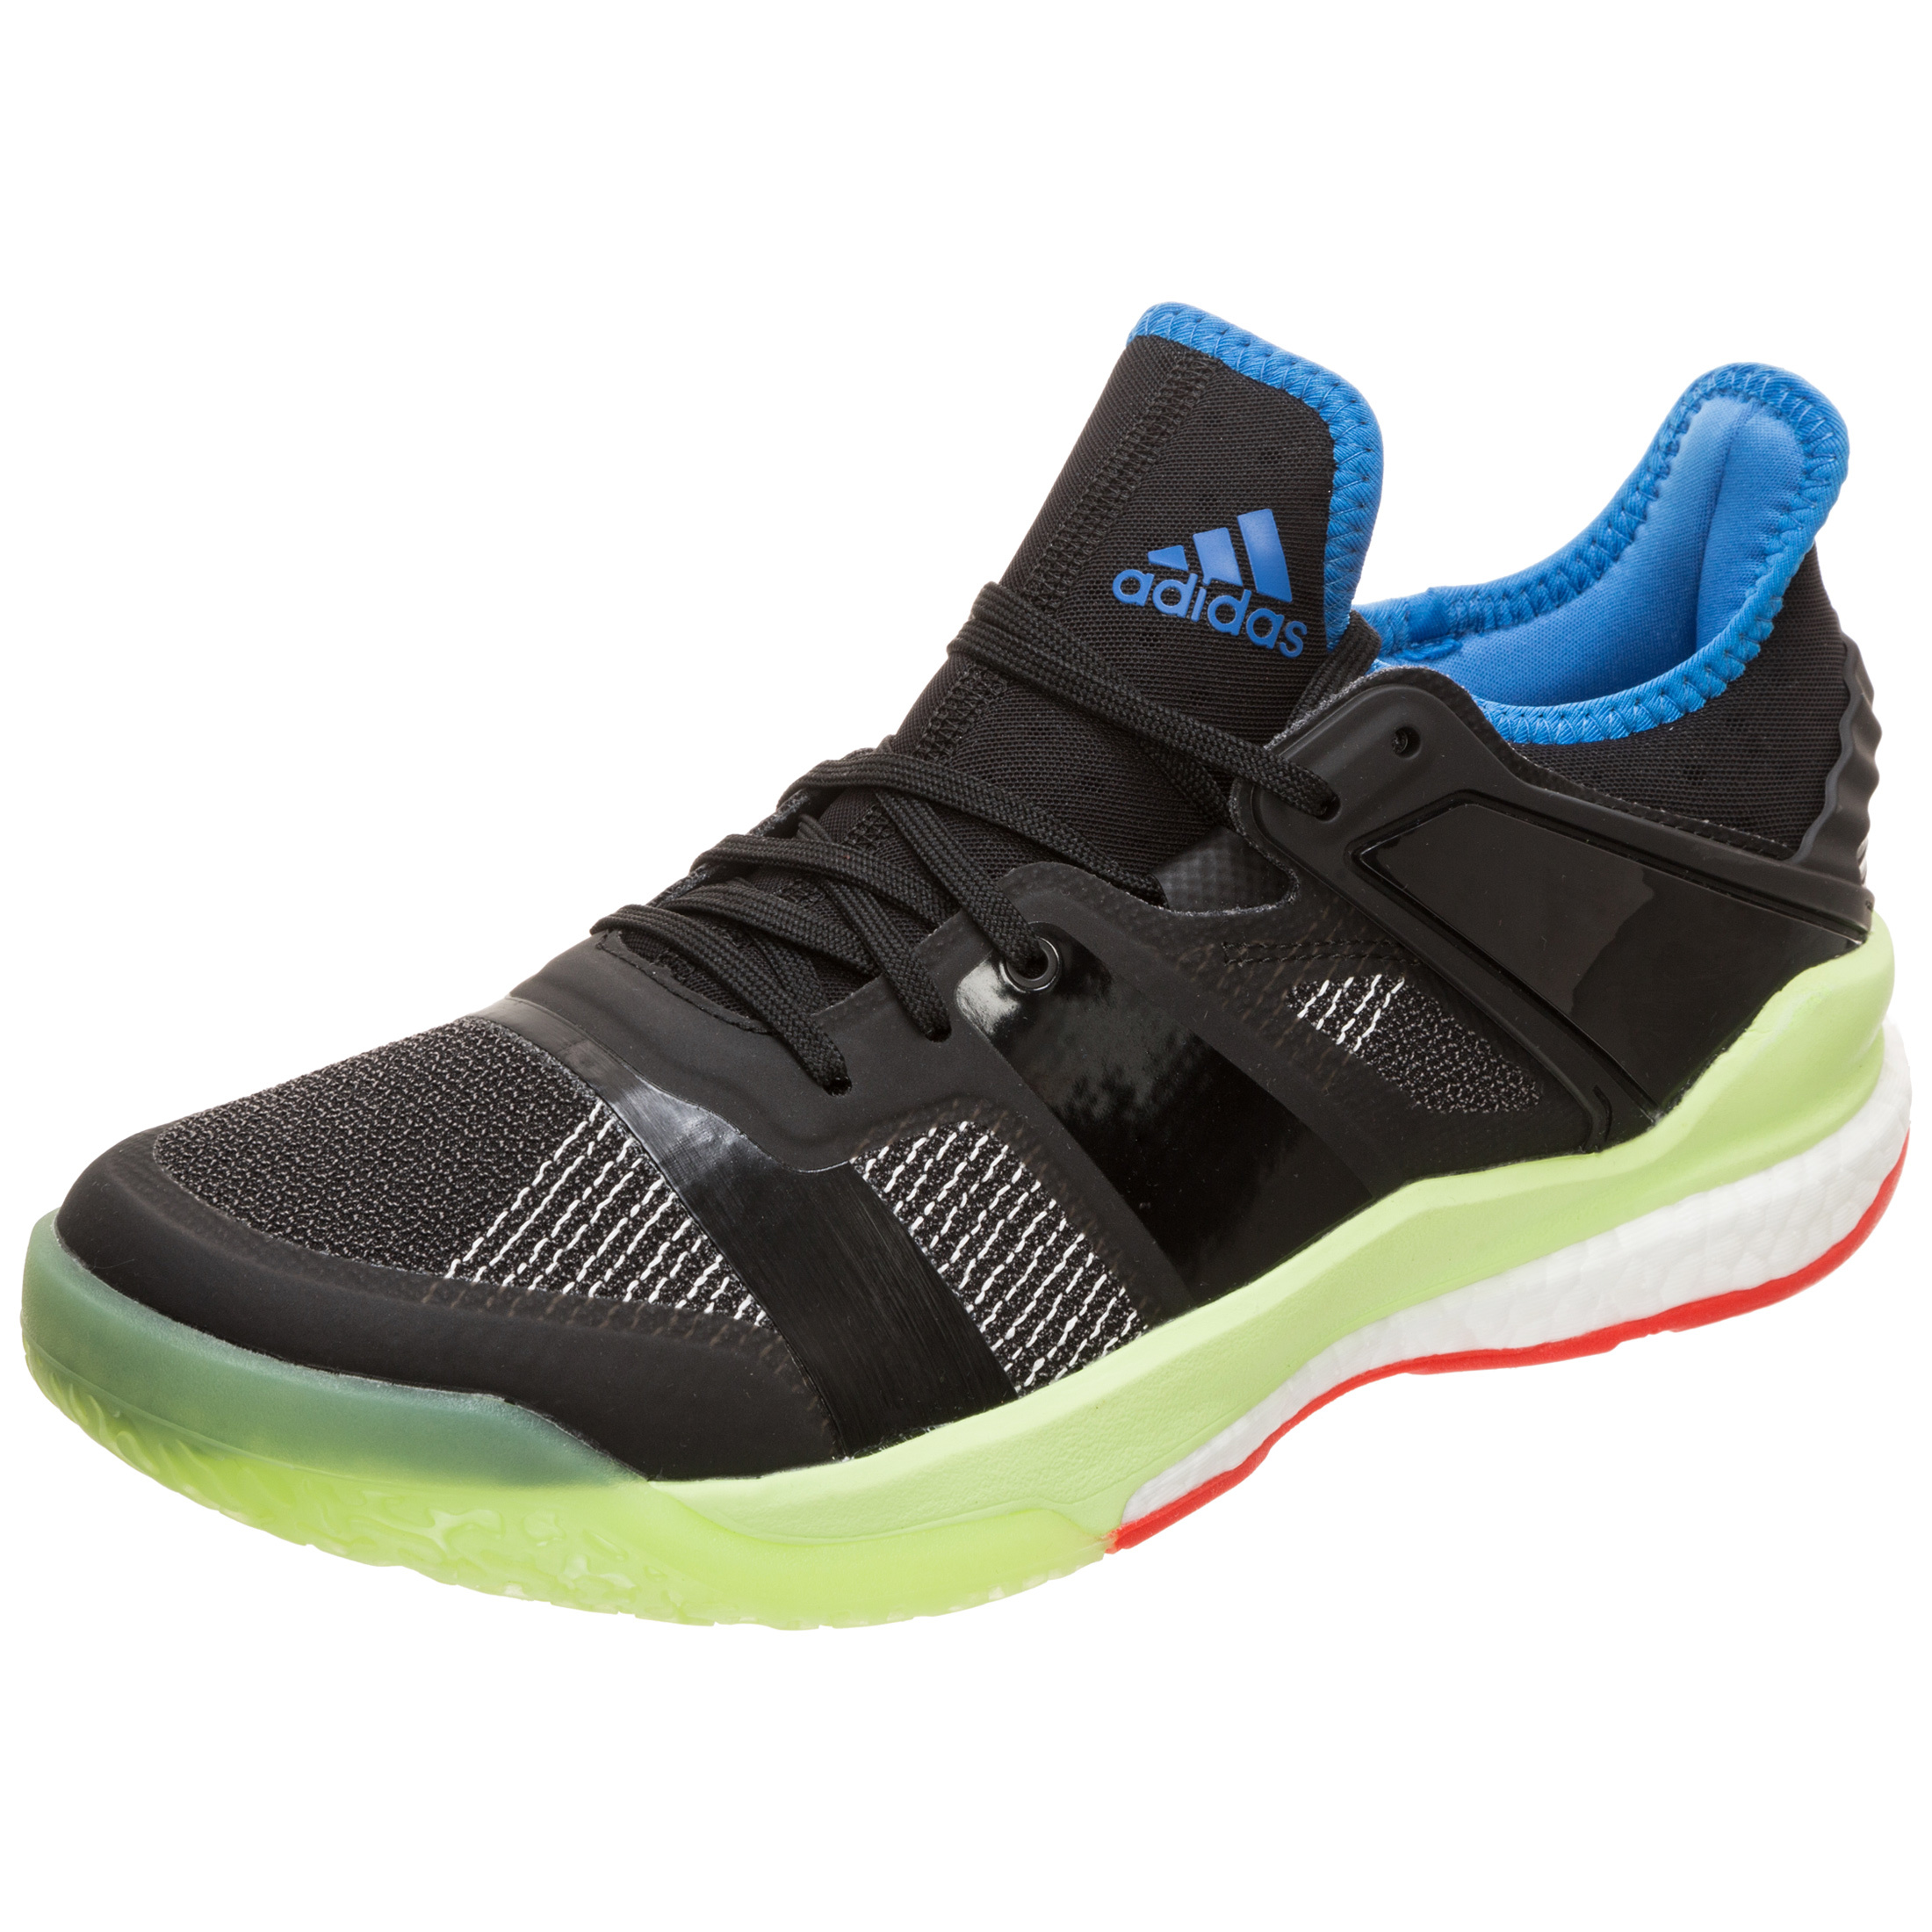 adidas stabil x bd7410 buy clothes shoes online